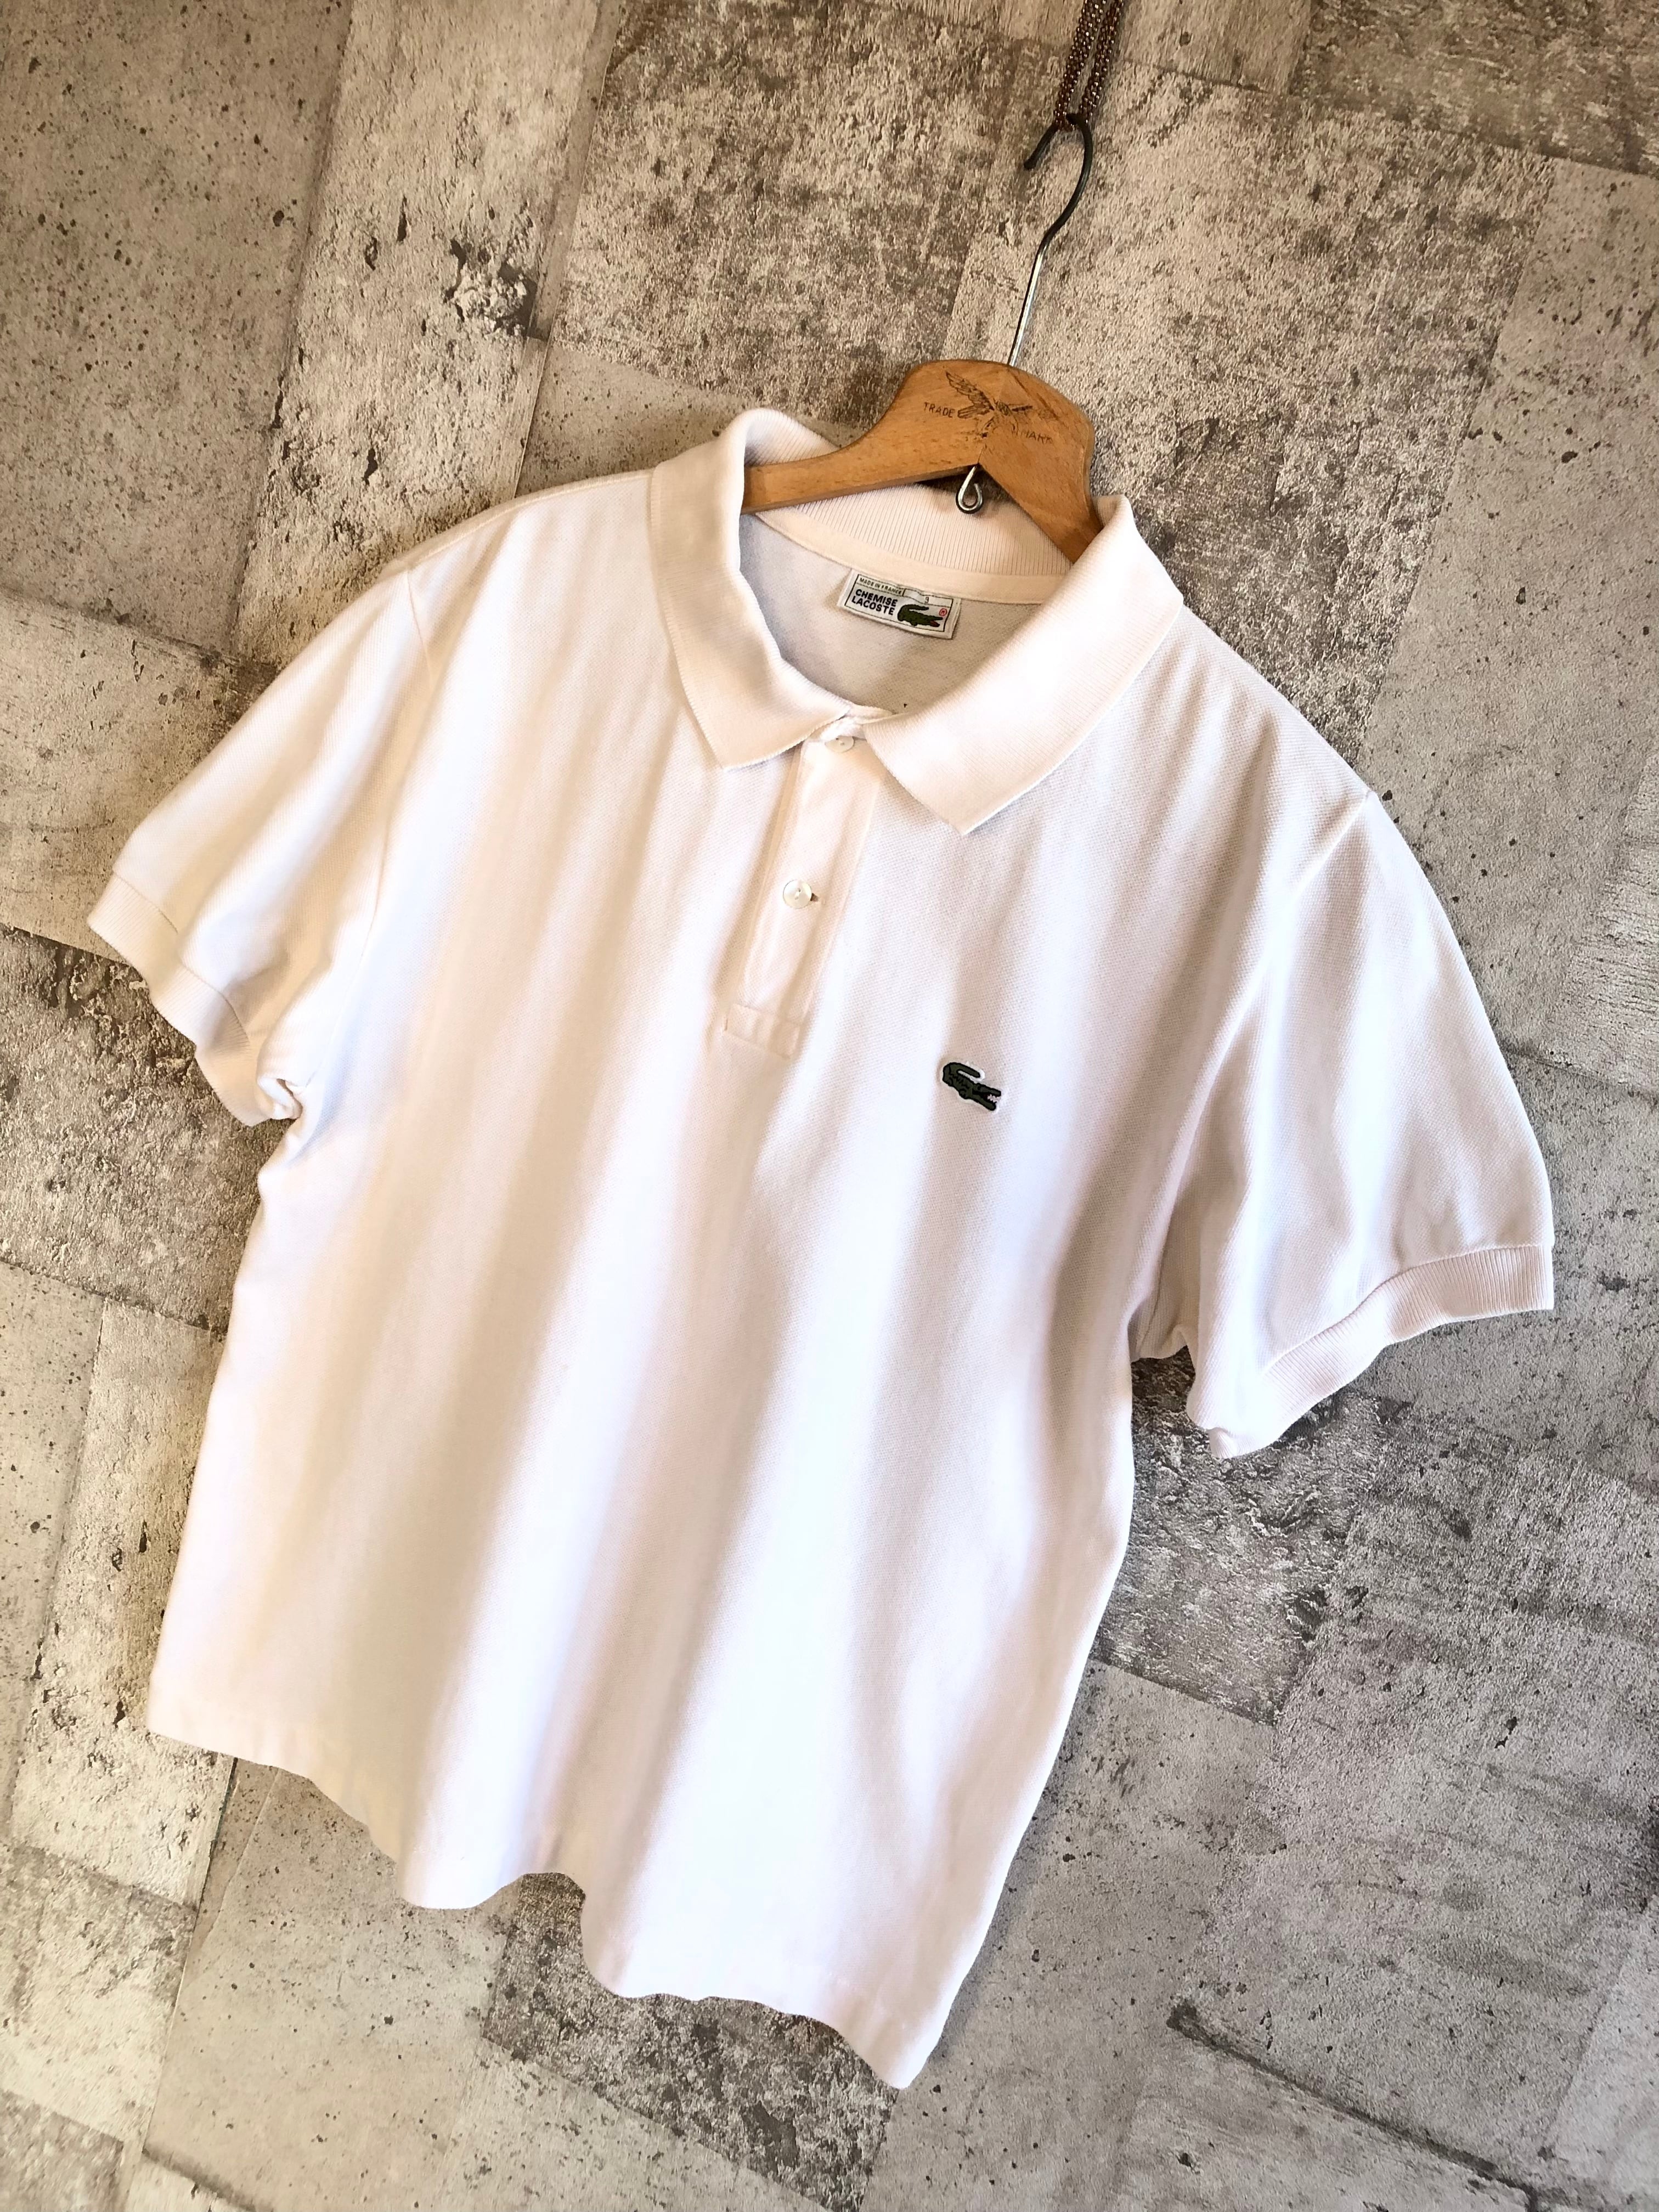 70s-80s FRANCE製 LACOSTE - 5191L / L1212 S/S POLO SHIRT OLD VINTAGE フランス製  フレンチラコステ ポロシャツ オールド ビンテージ | Antique House Vintage Clothing